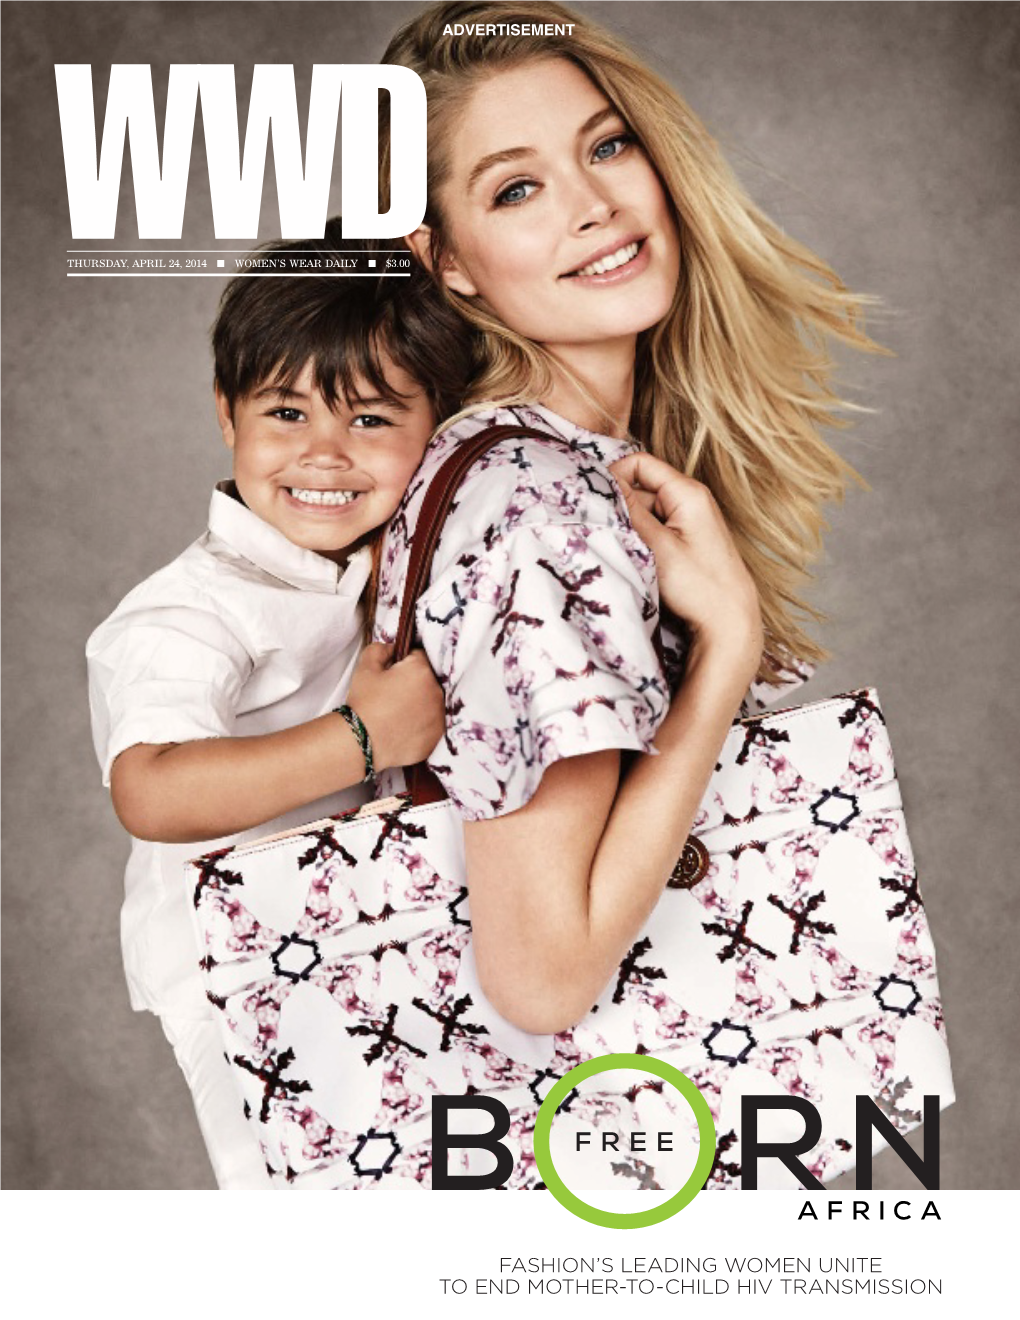 Born Free - Wwd - April 24 - Front Cover